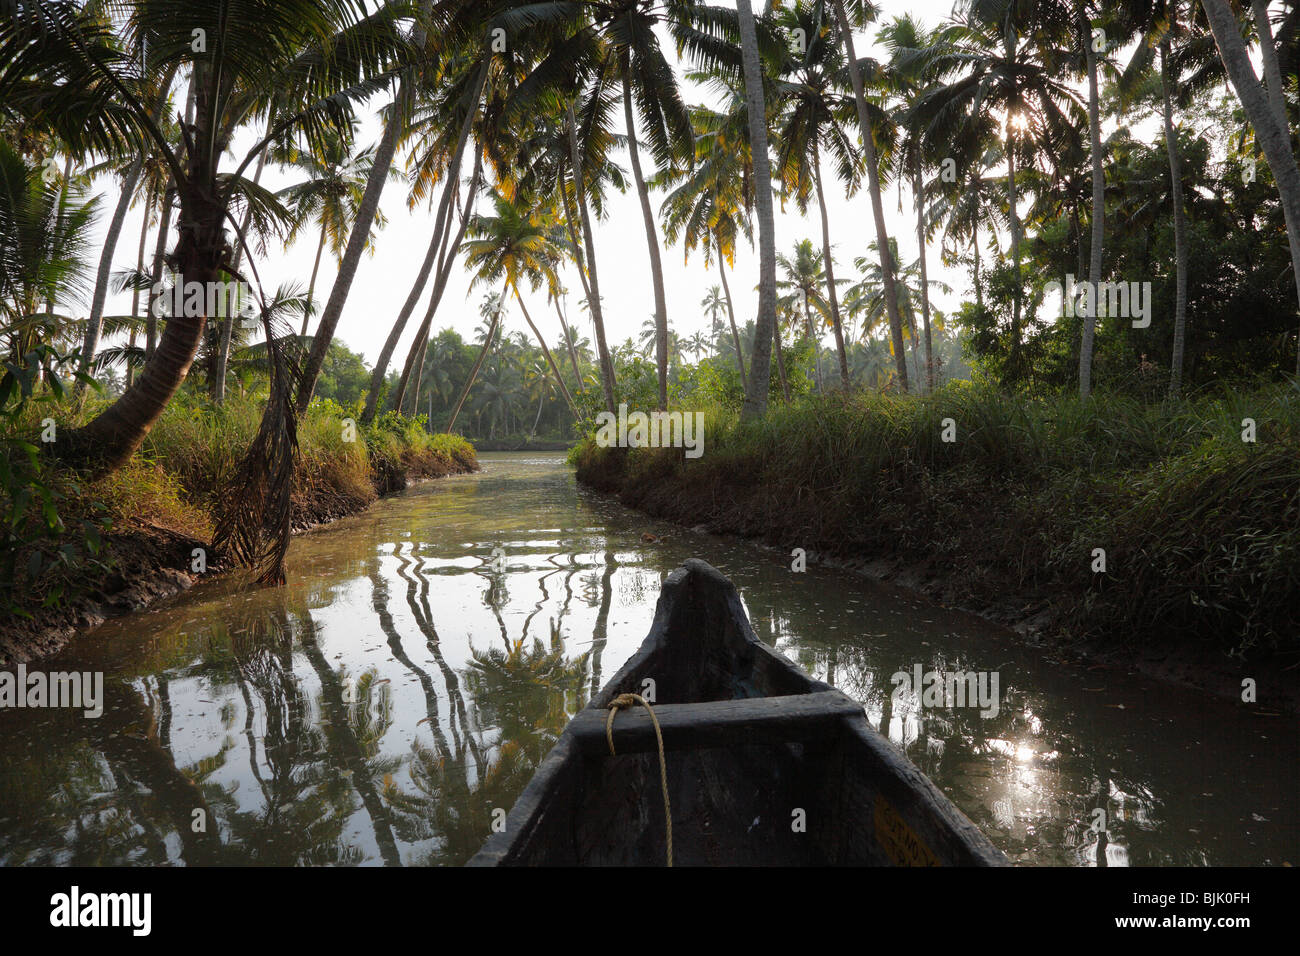 Backwater tour on a tributary of the Poovar River, Puvar, Kerala, South India, India, Asia Stock Photo